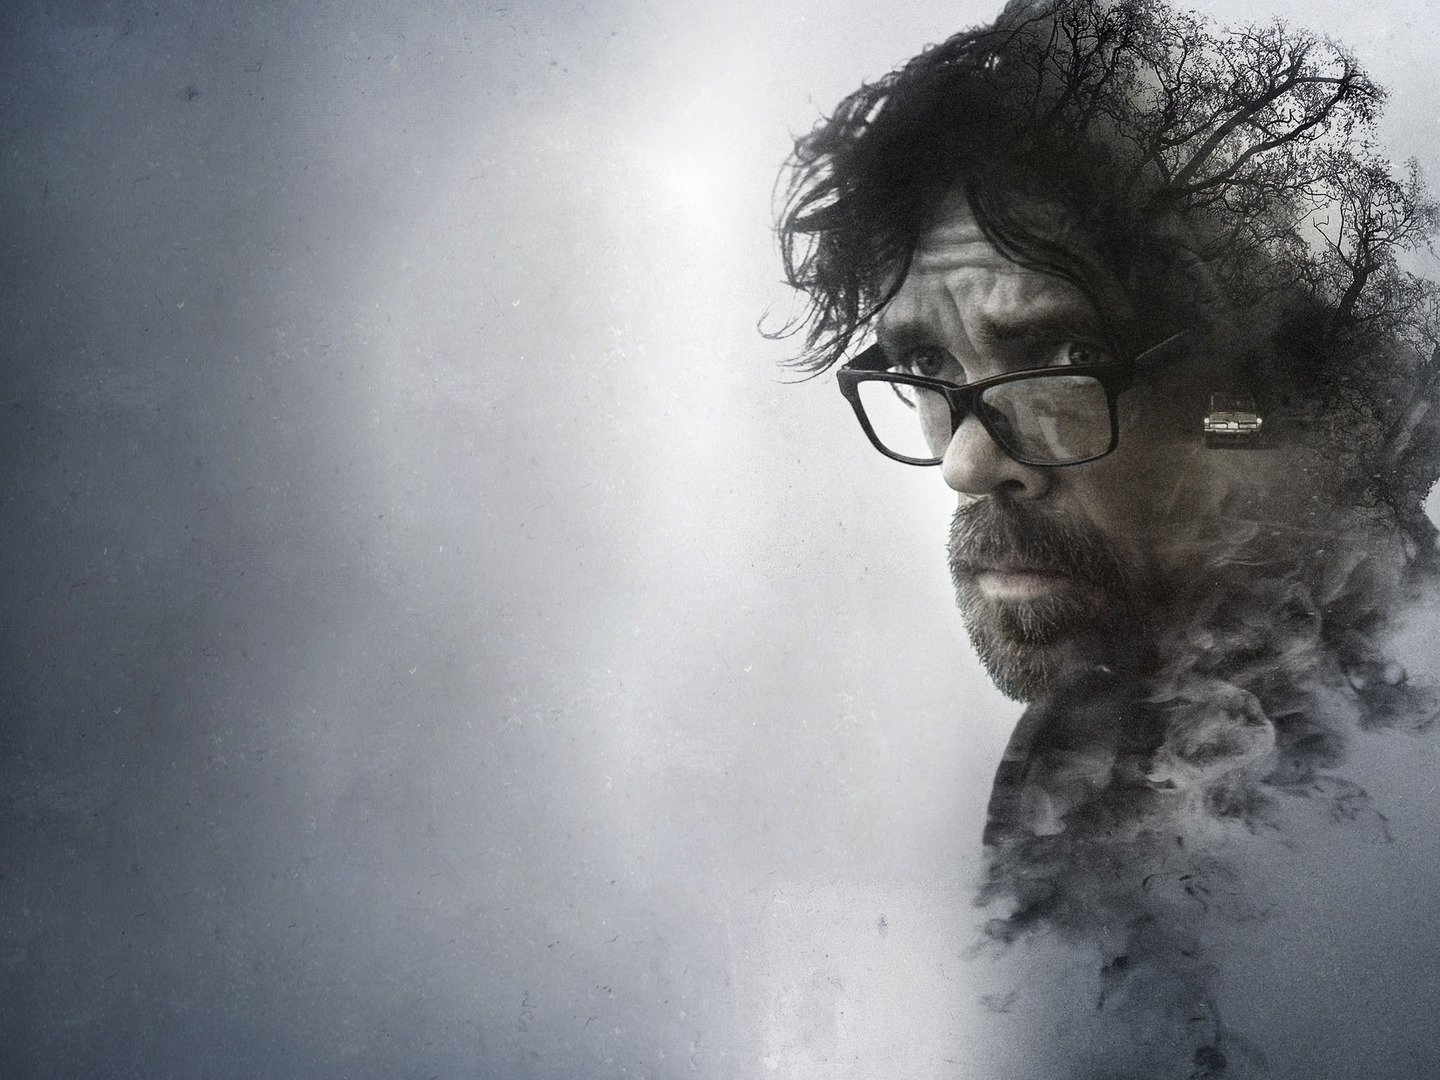 Peter Dinklage Rememory Movie Poster Wallpapers